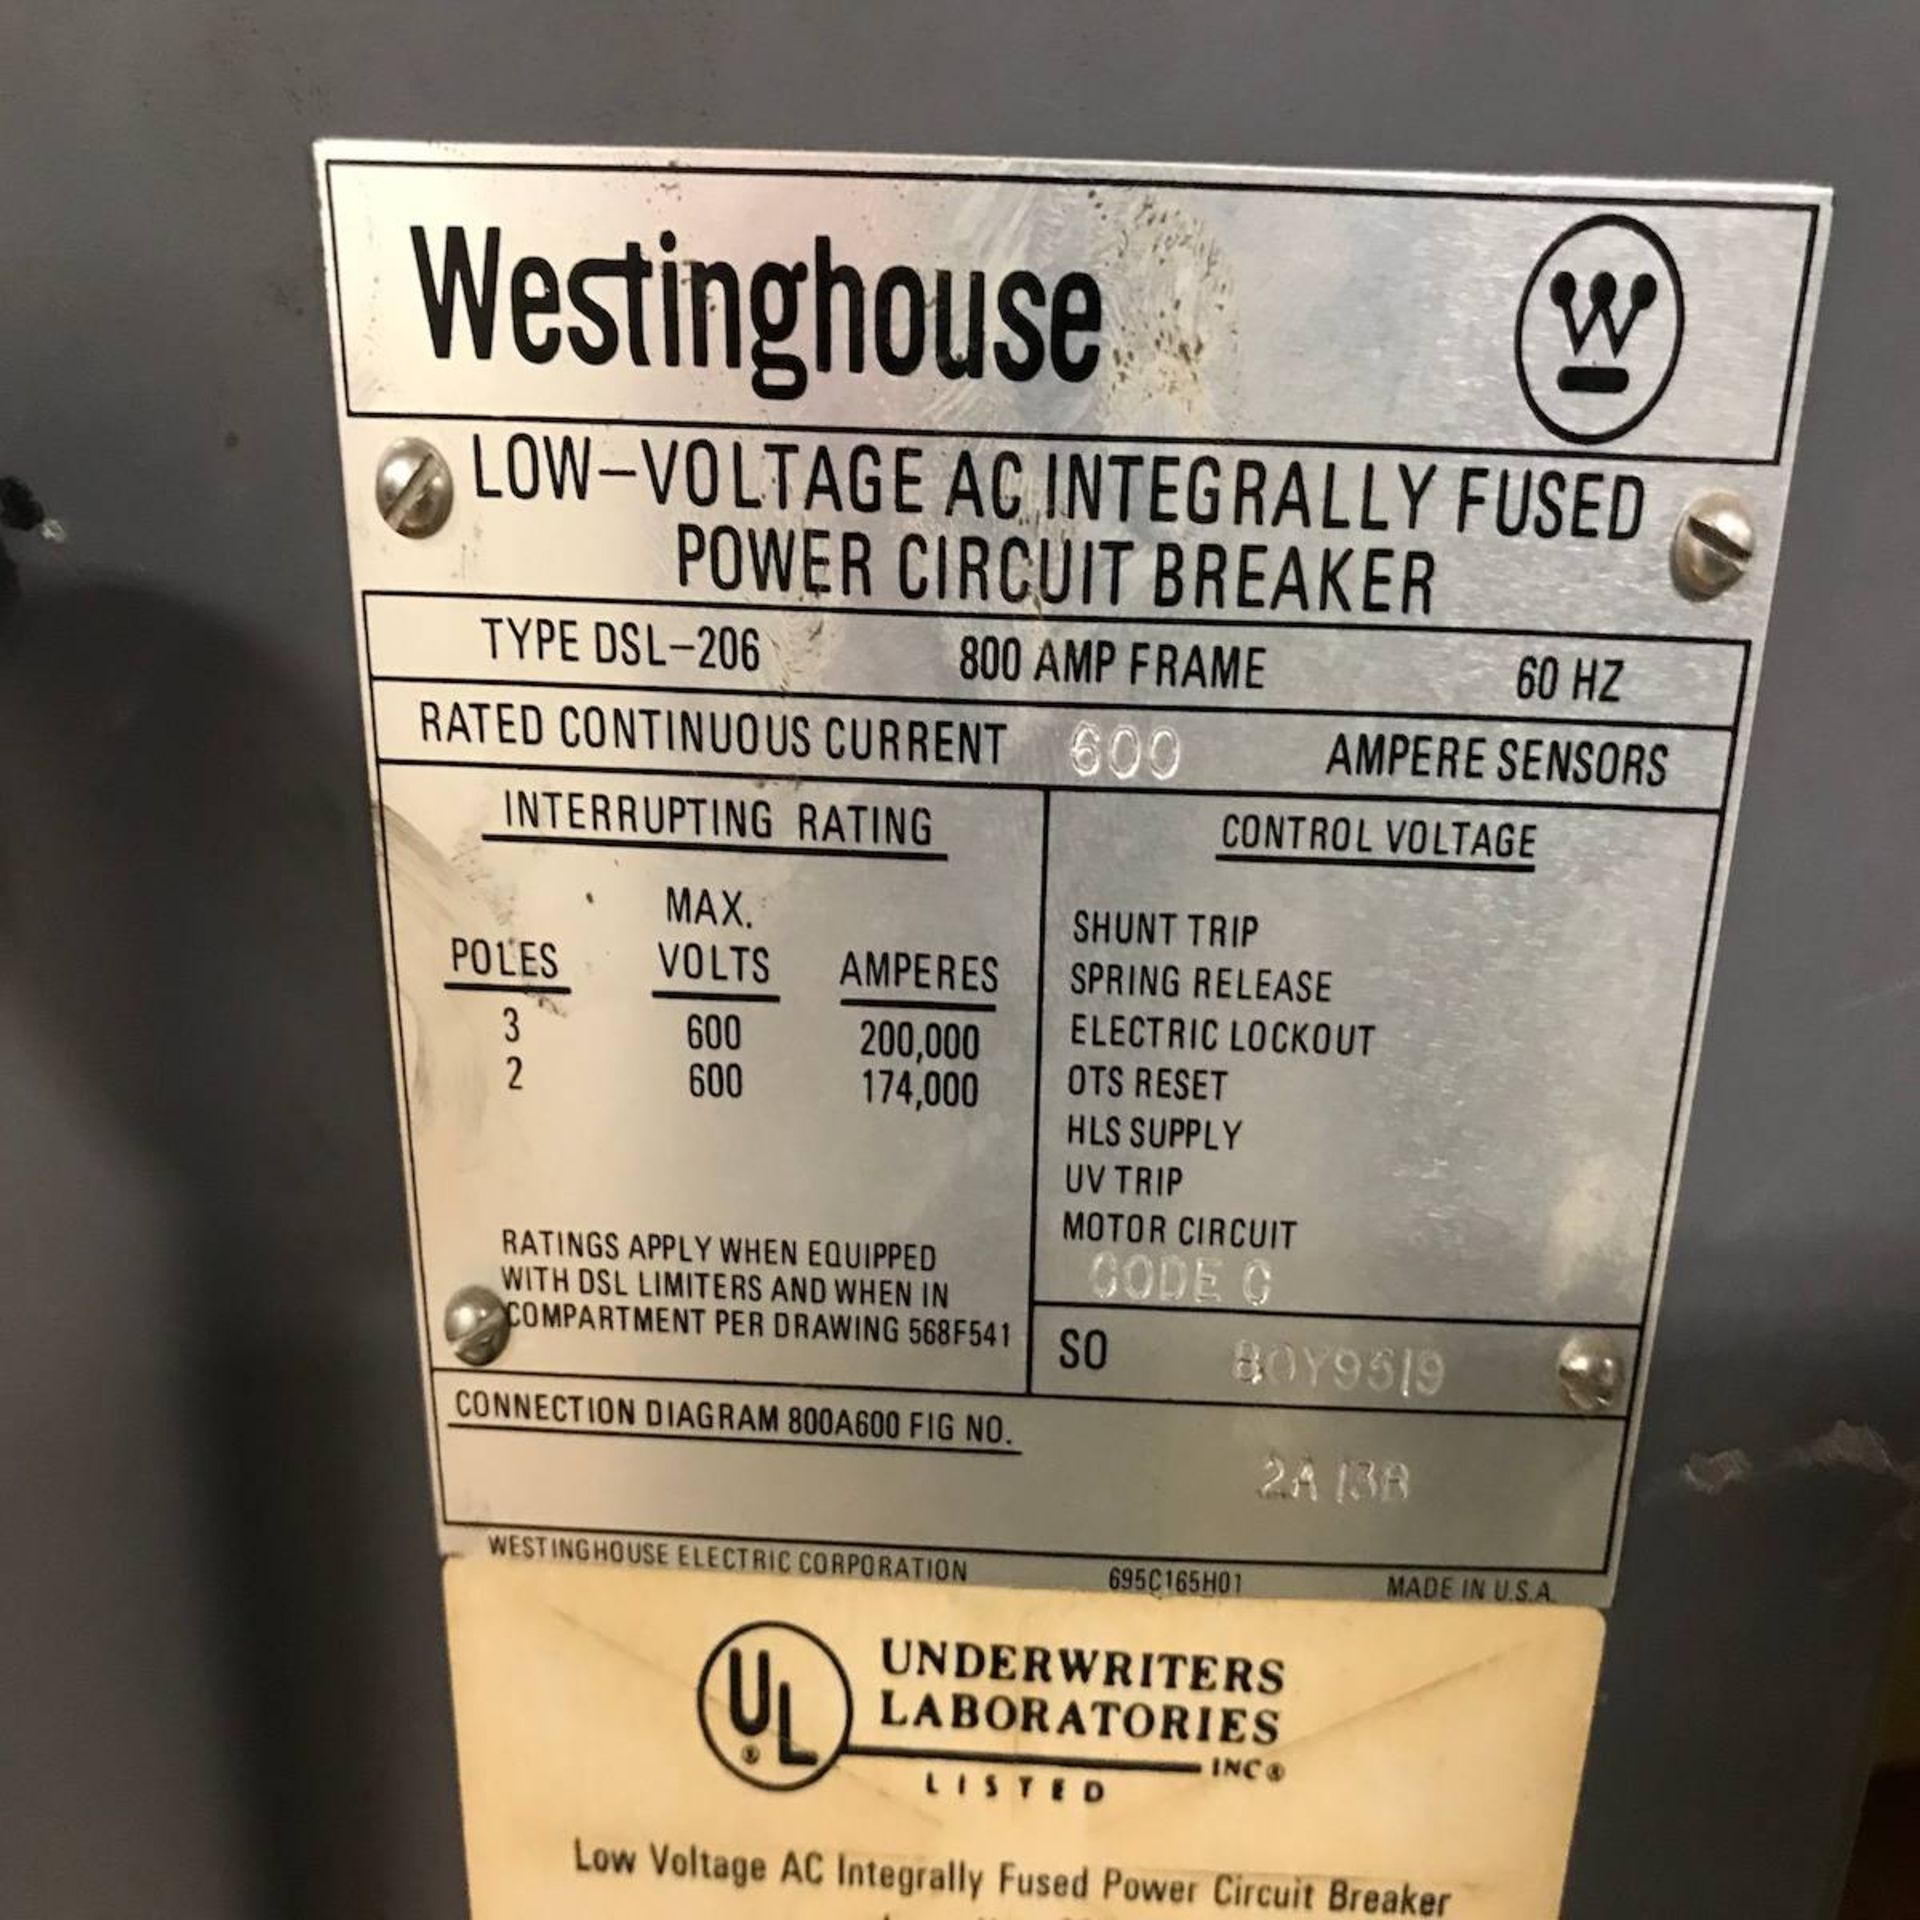 Westinghouse DSL-206 Low Voltage AC Integrally Fused Power Circuit Breaker - Image 3 of 4